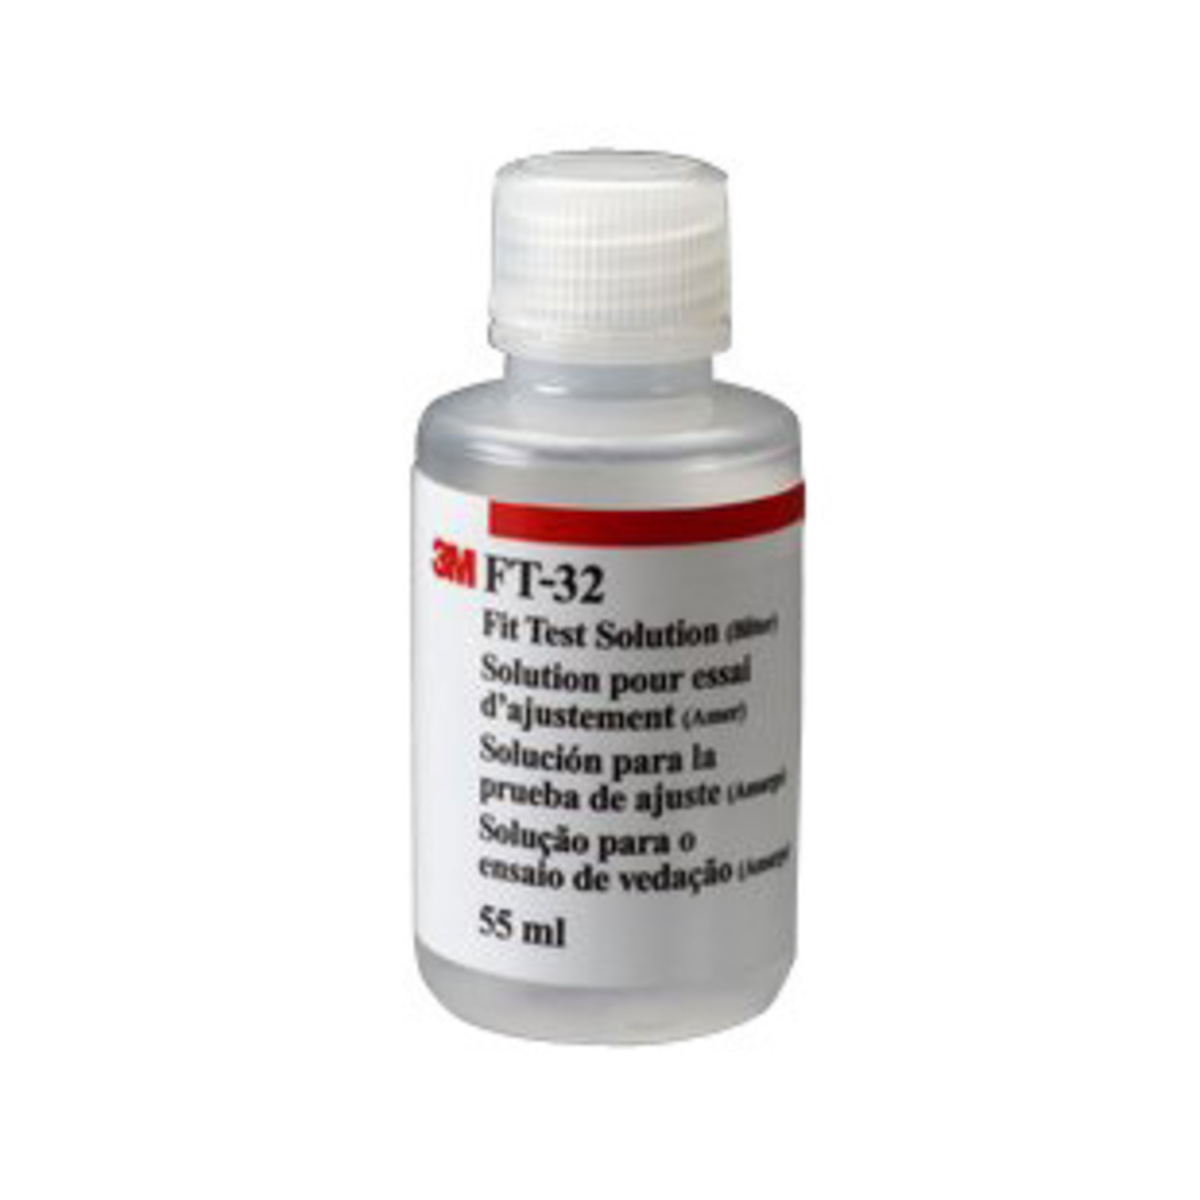 3M™ 55 mL Bitter Fit Test Solution For Disposable Respirators And Reusable Respirators (For Use With 3M™ FT-30 Qualitative Fit T